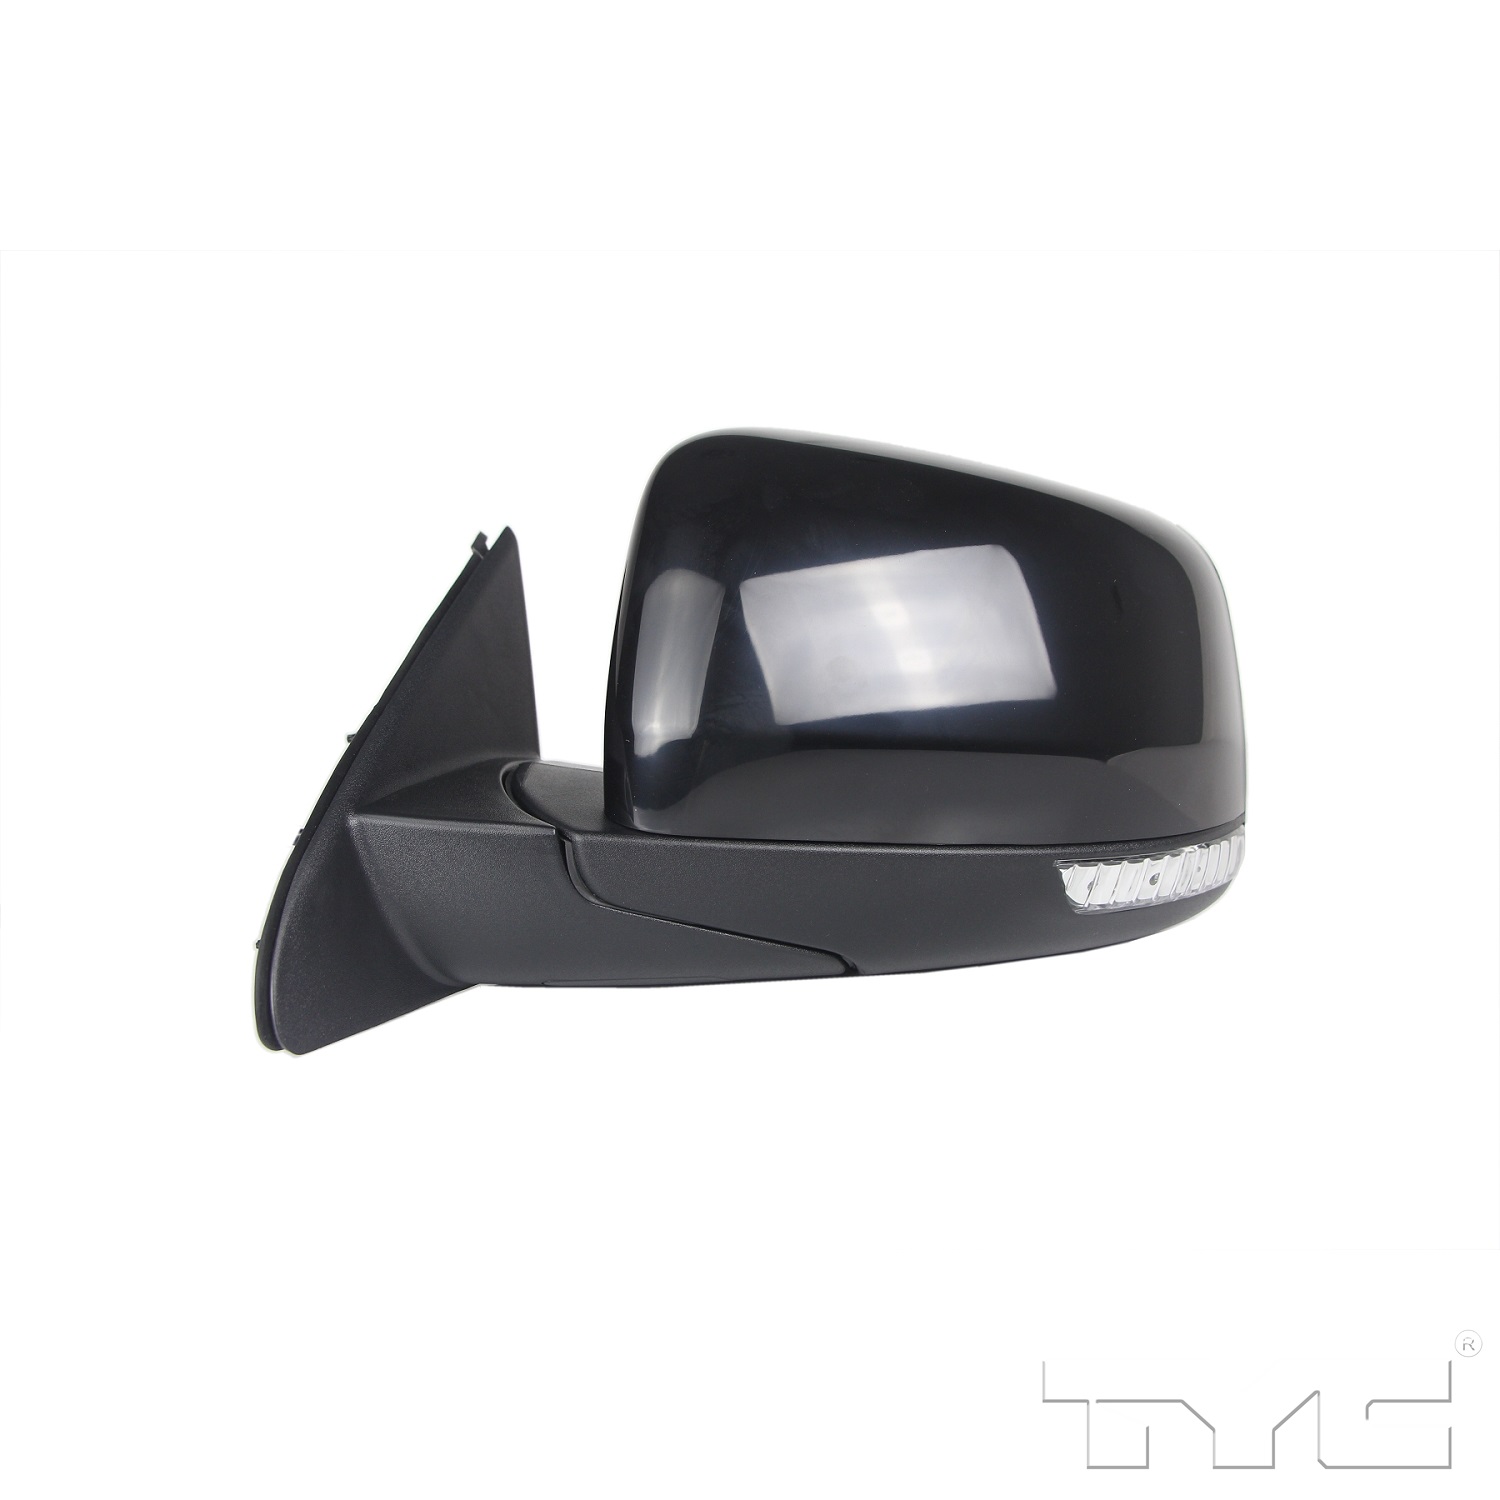 Aftermarket MIRRORS for JEEP - GRAND CHEROKEE WK, GRAND CHEROKEE WK,22-22,LT Mirror outside rear view